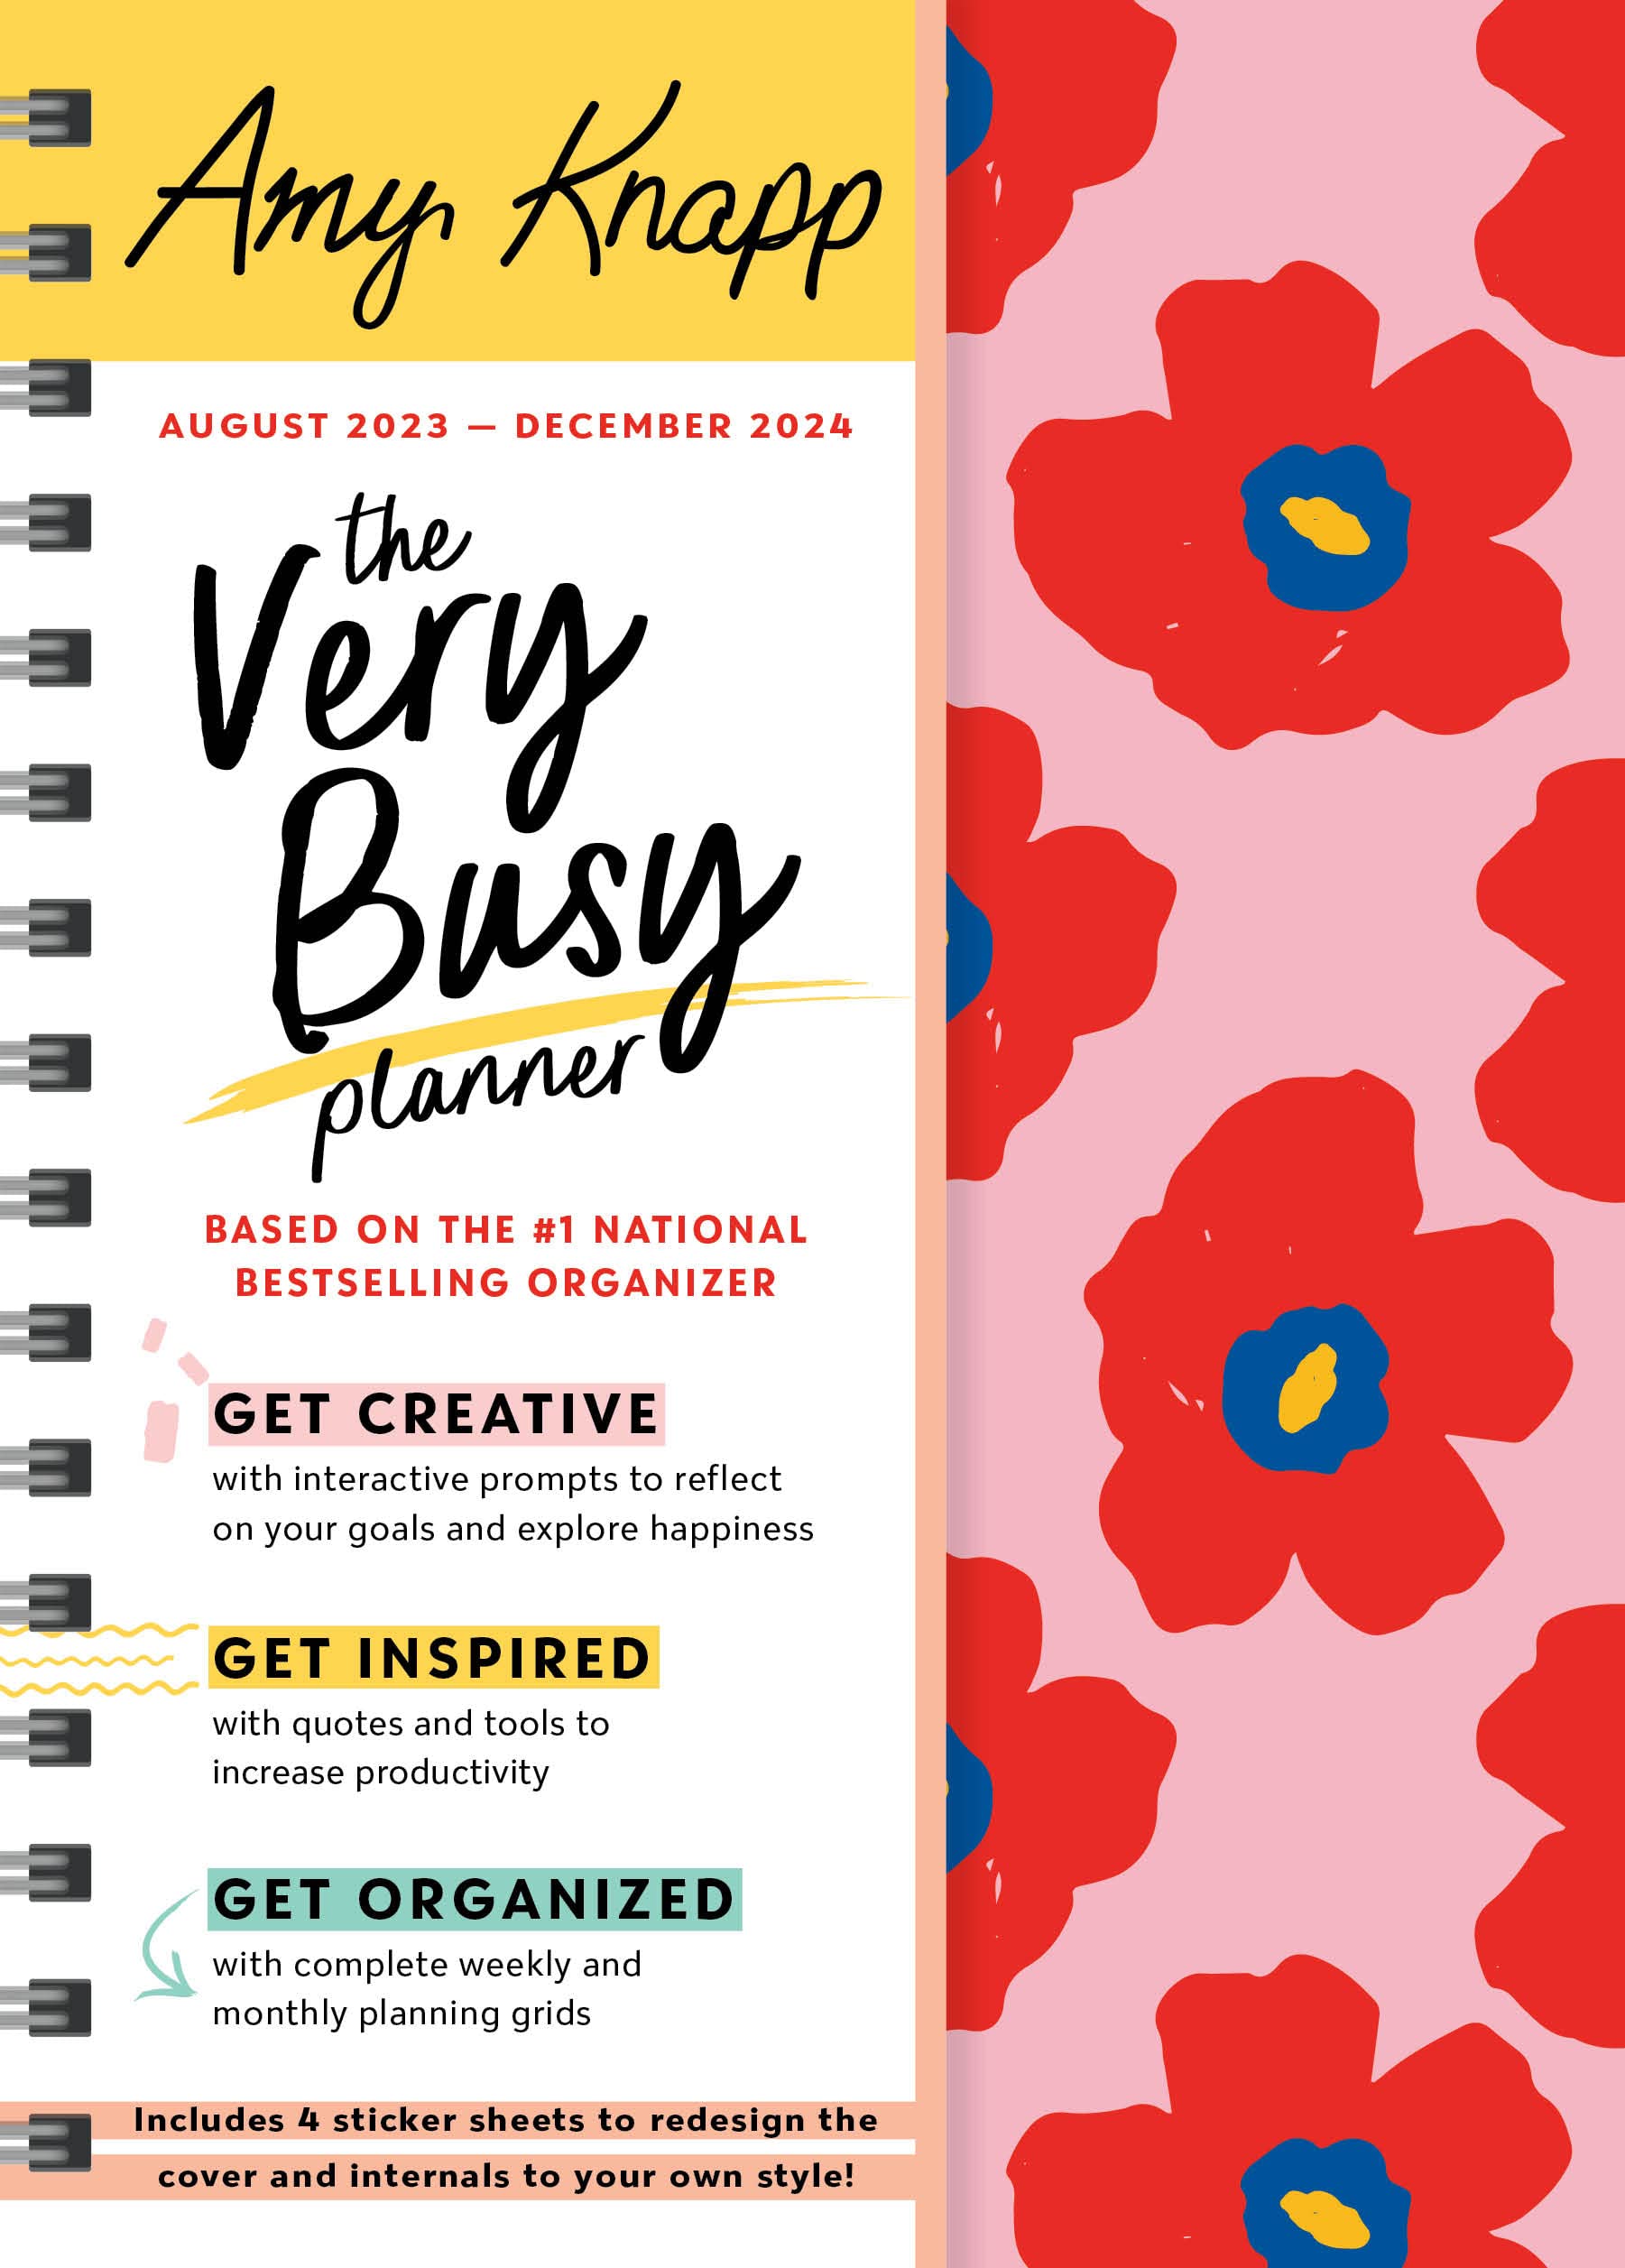 2024 Amy Knapp's The Very Busy Planner: 17-Month Weekly Organizer for Women (Includes Stickers, Student Planner, Family Planner, Thru December 2024) (Amy Knapp's Plan Your Life Calendars)